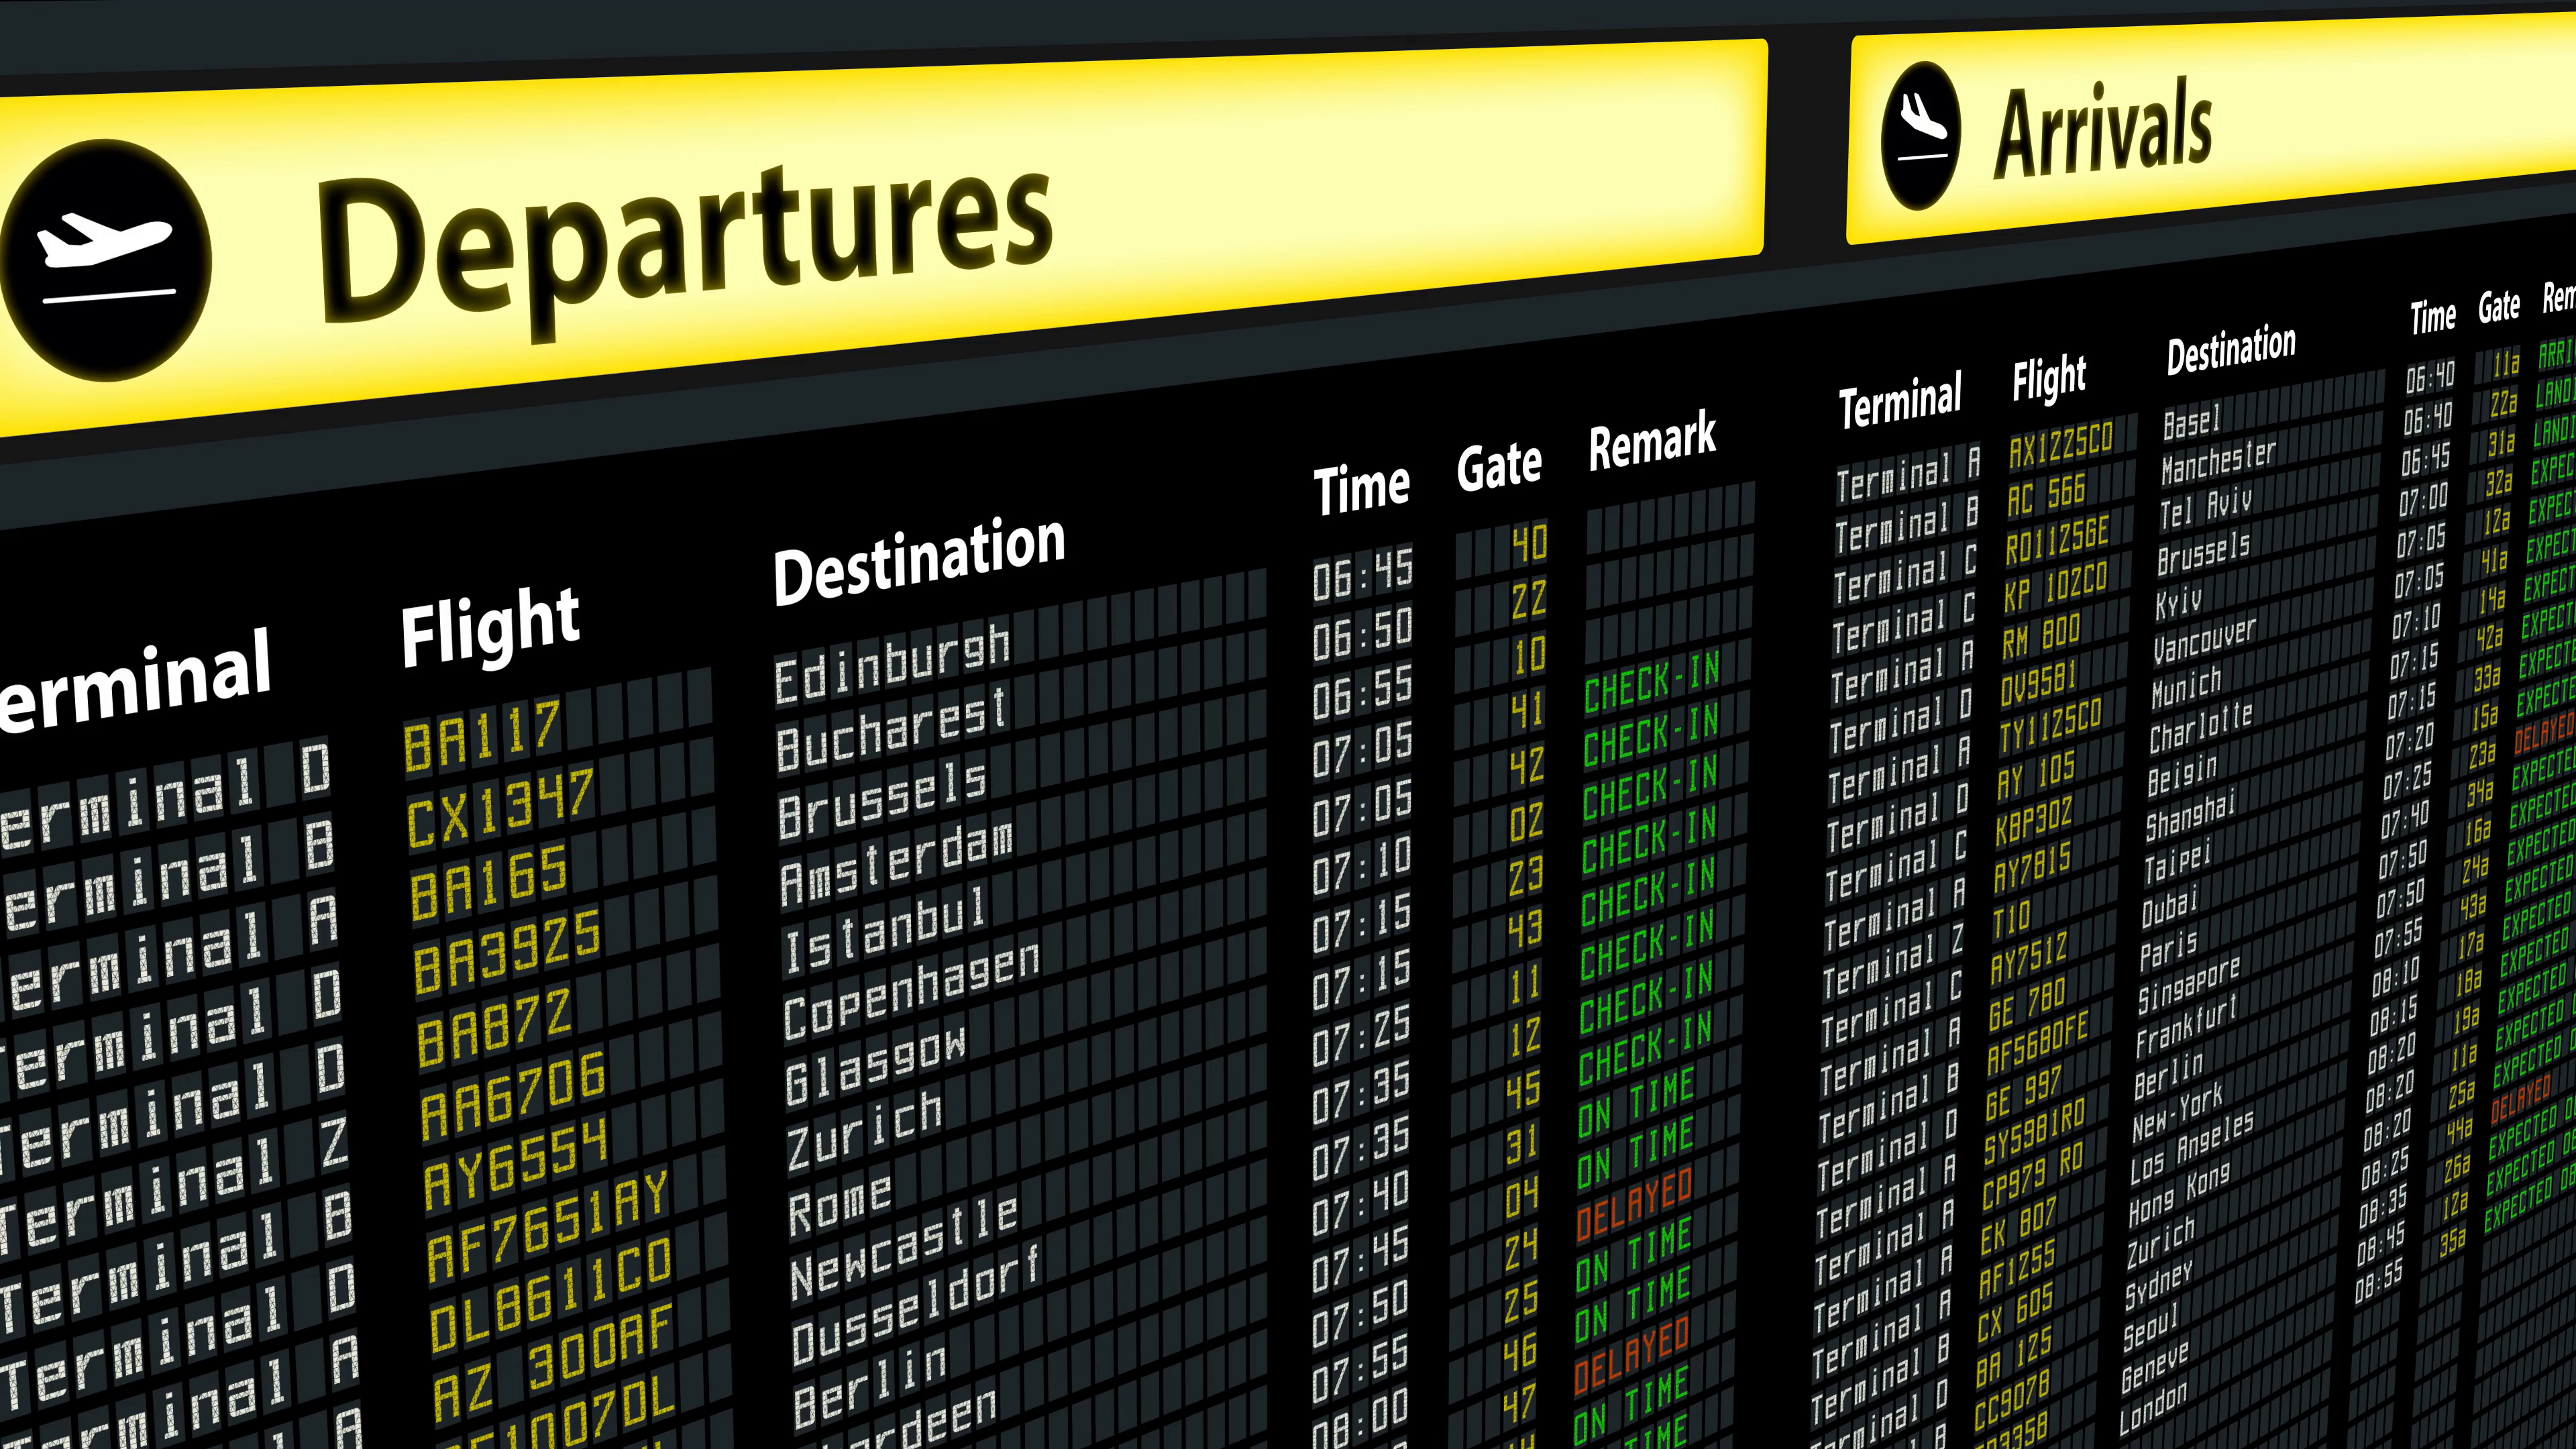 Flight information on airport arrivals departures board, timetable ...